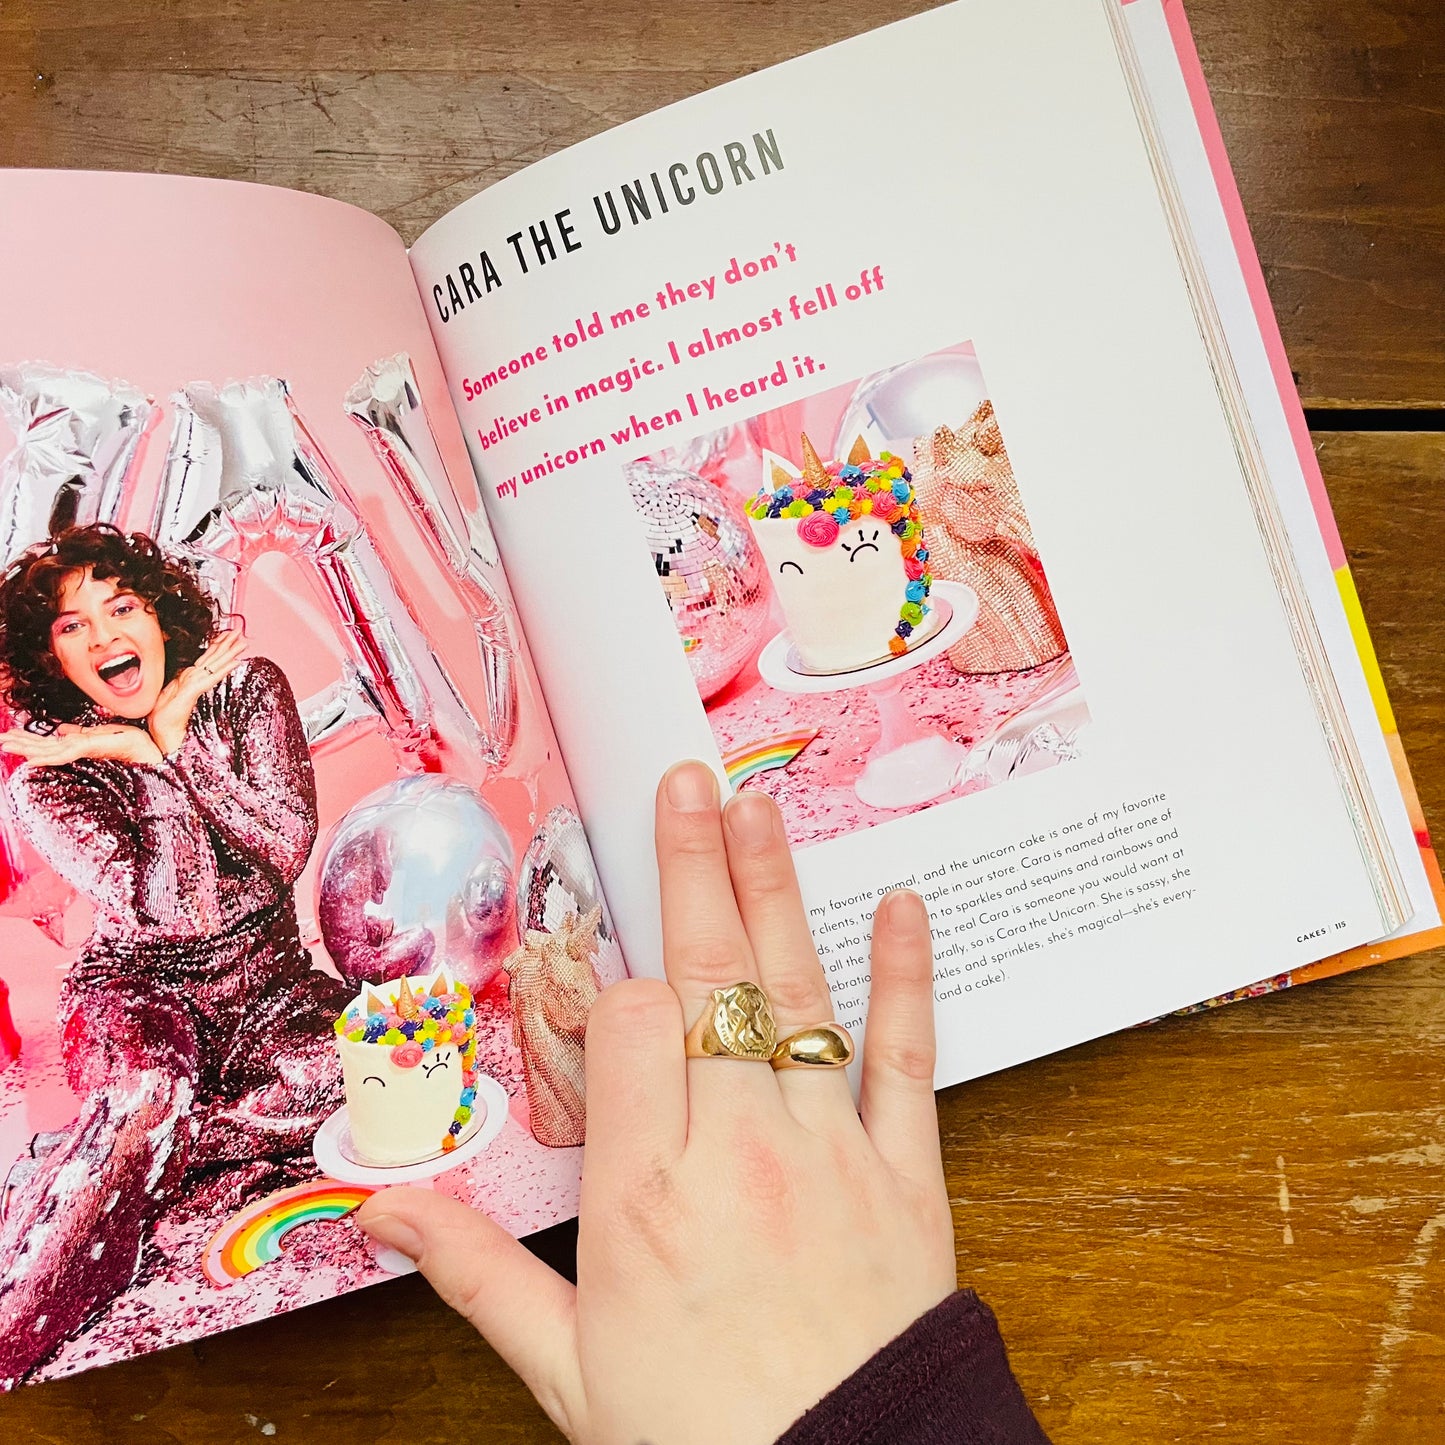 The Power of Sprinkles: A Cake Book by the Founder of Flour Shop